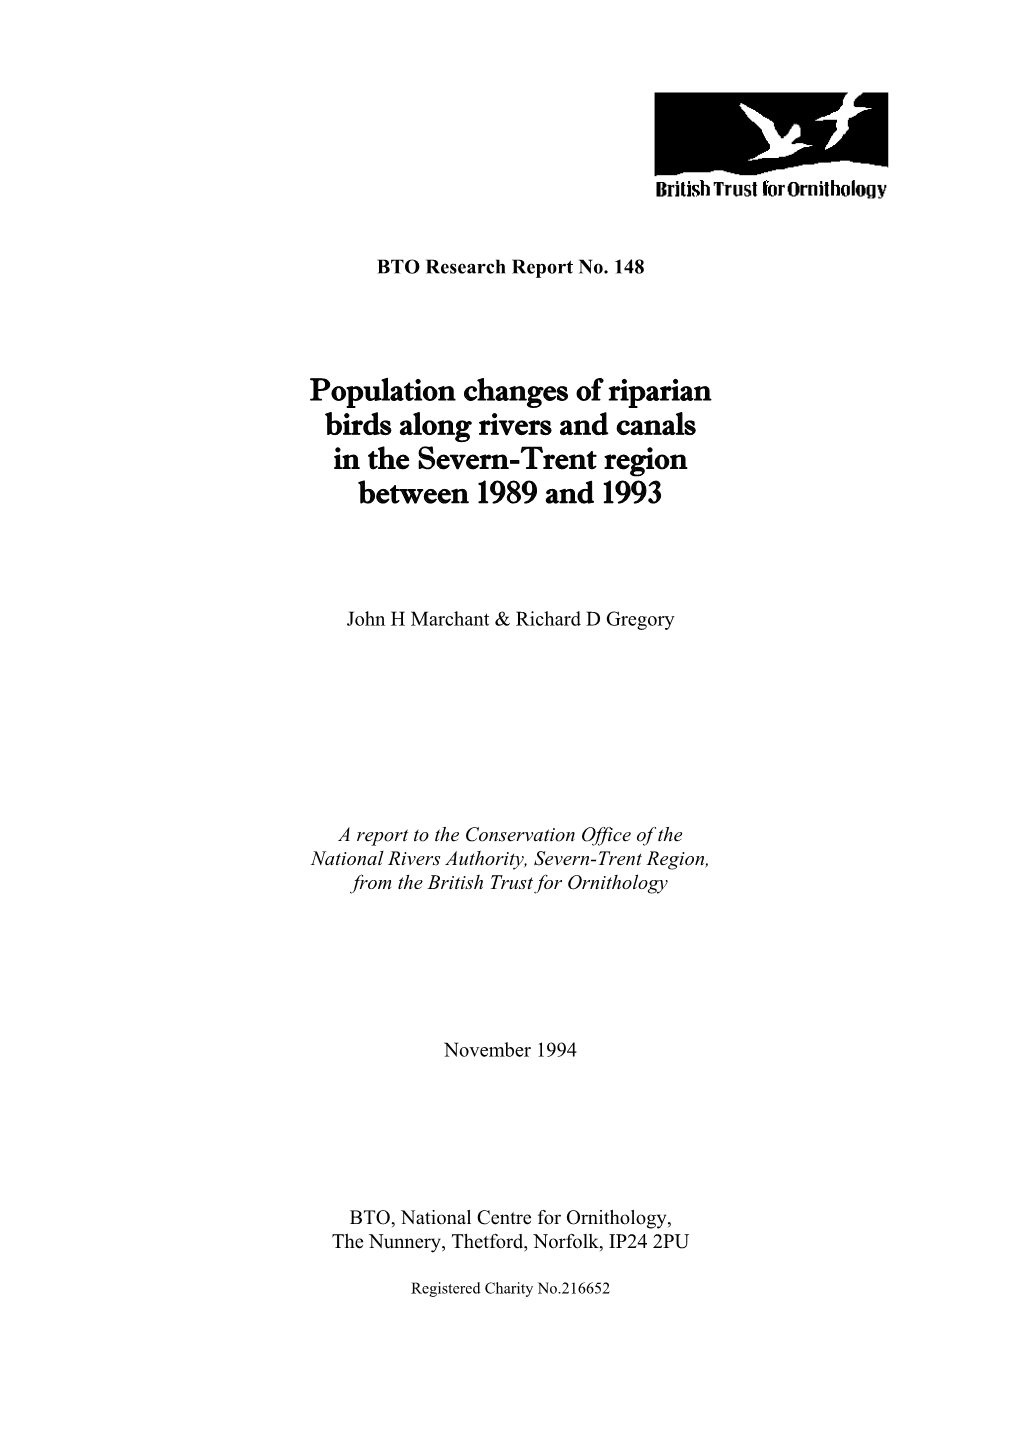 Population Changes of Riparian Birds Along Rivers and Canals in the Severn-Trent Region Between 1989 and 1993